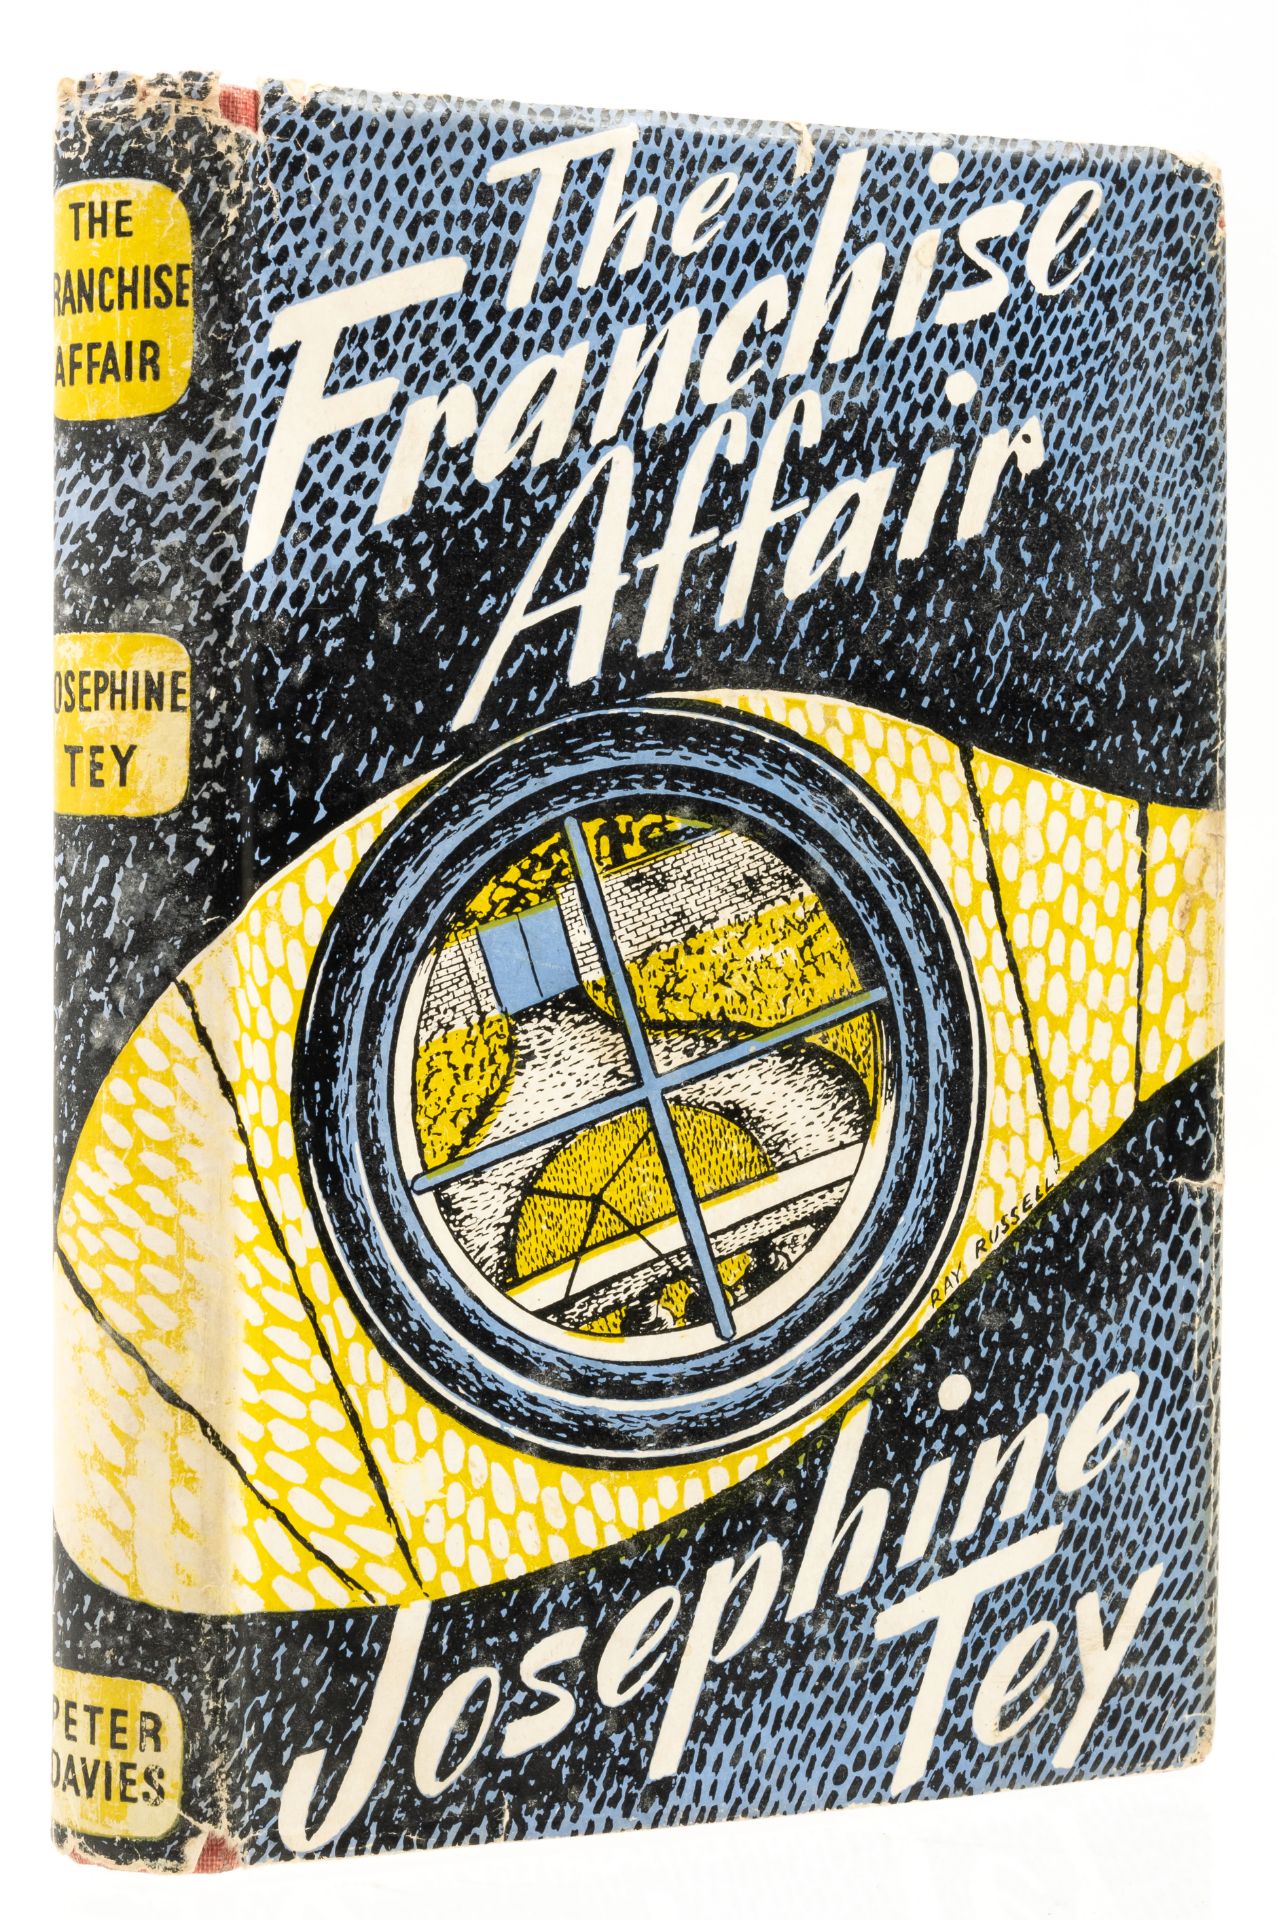 Tey (Josephine) The Franchise Affair, first edition, 1948.